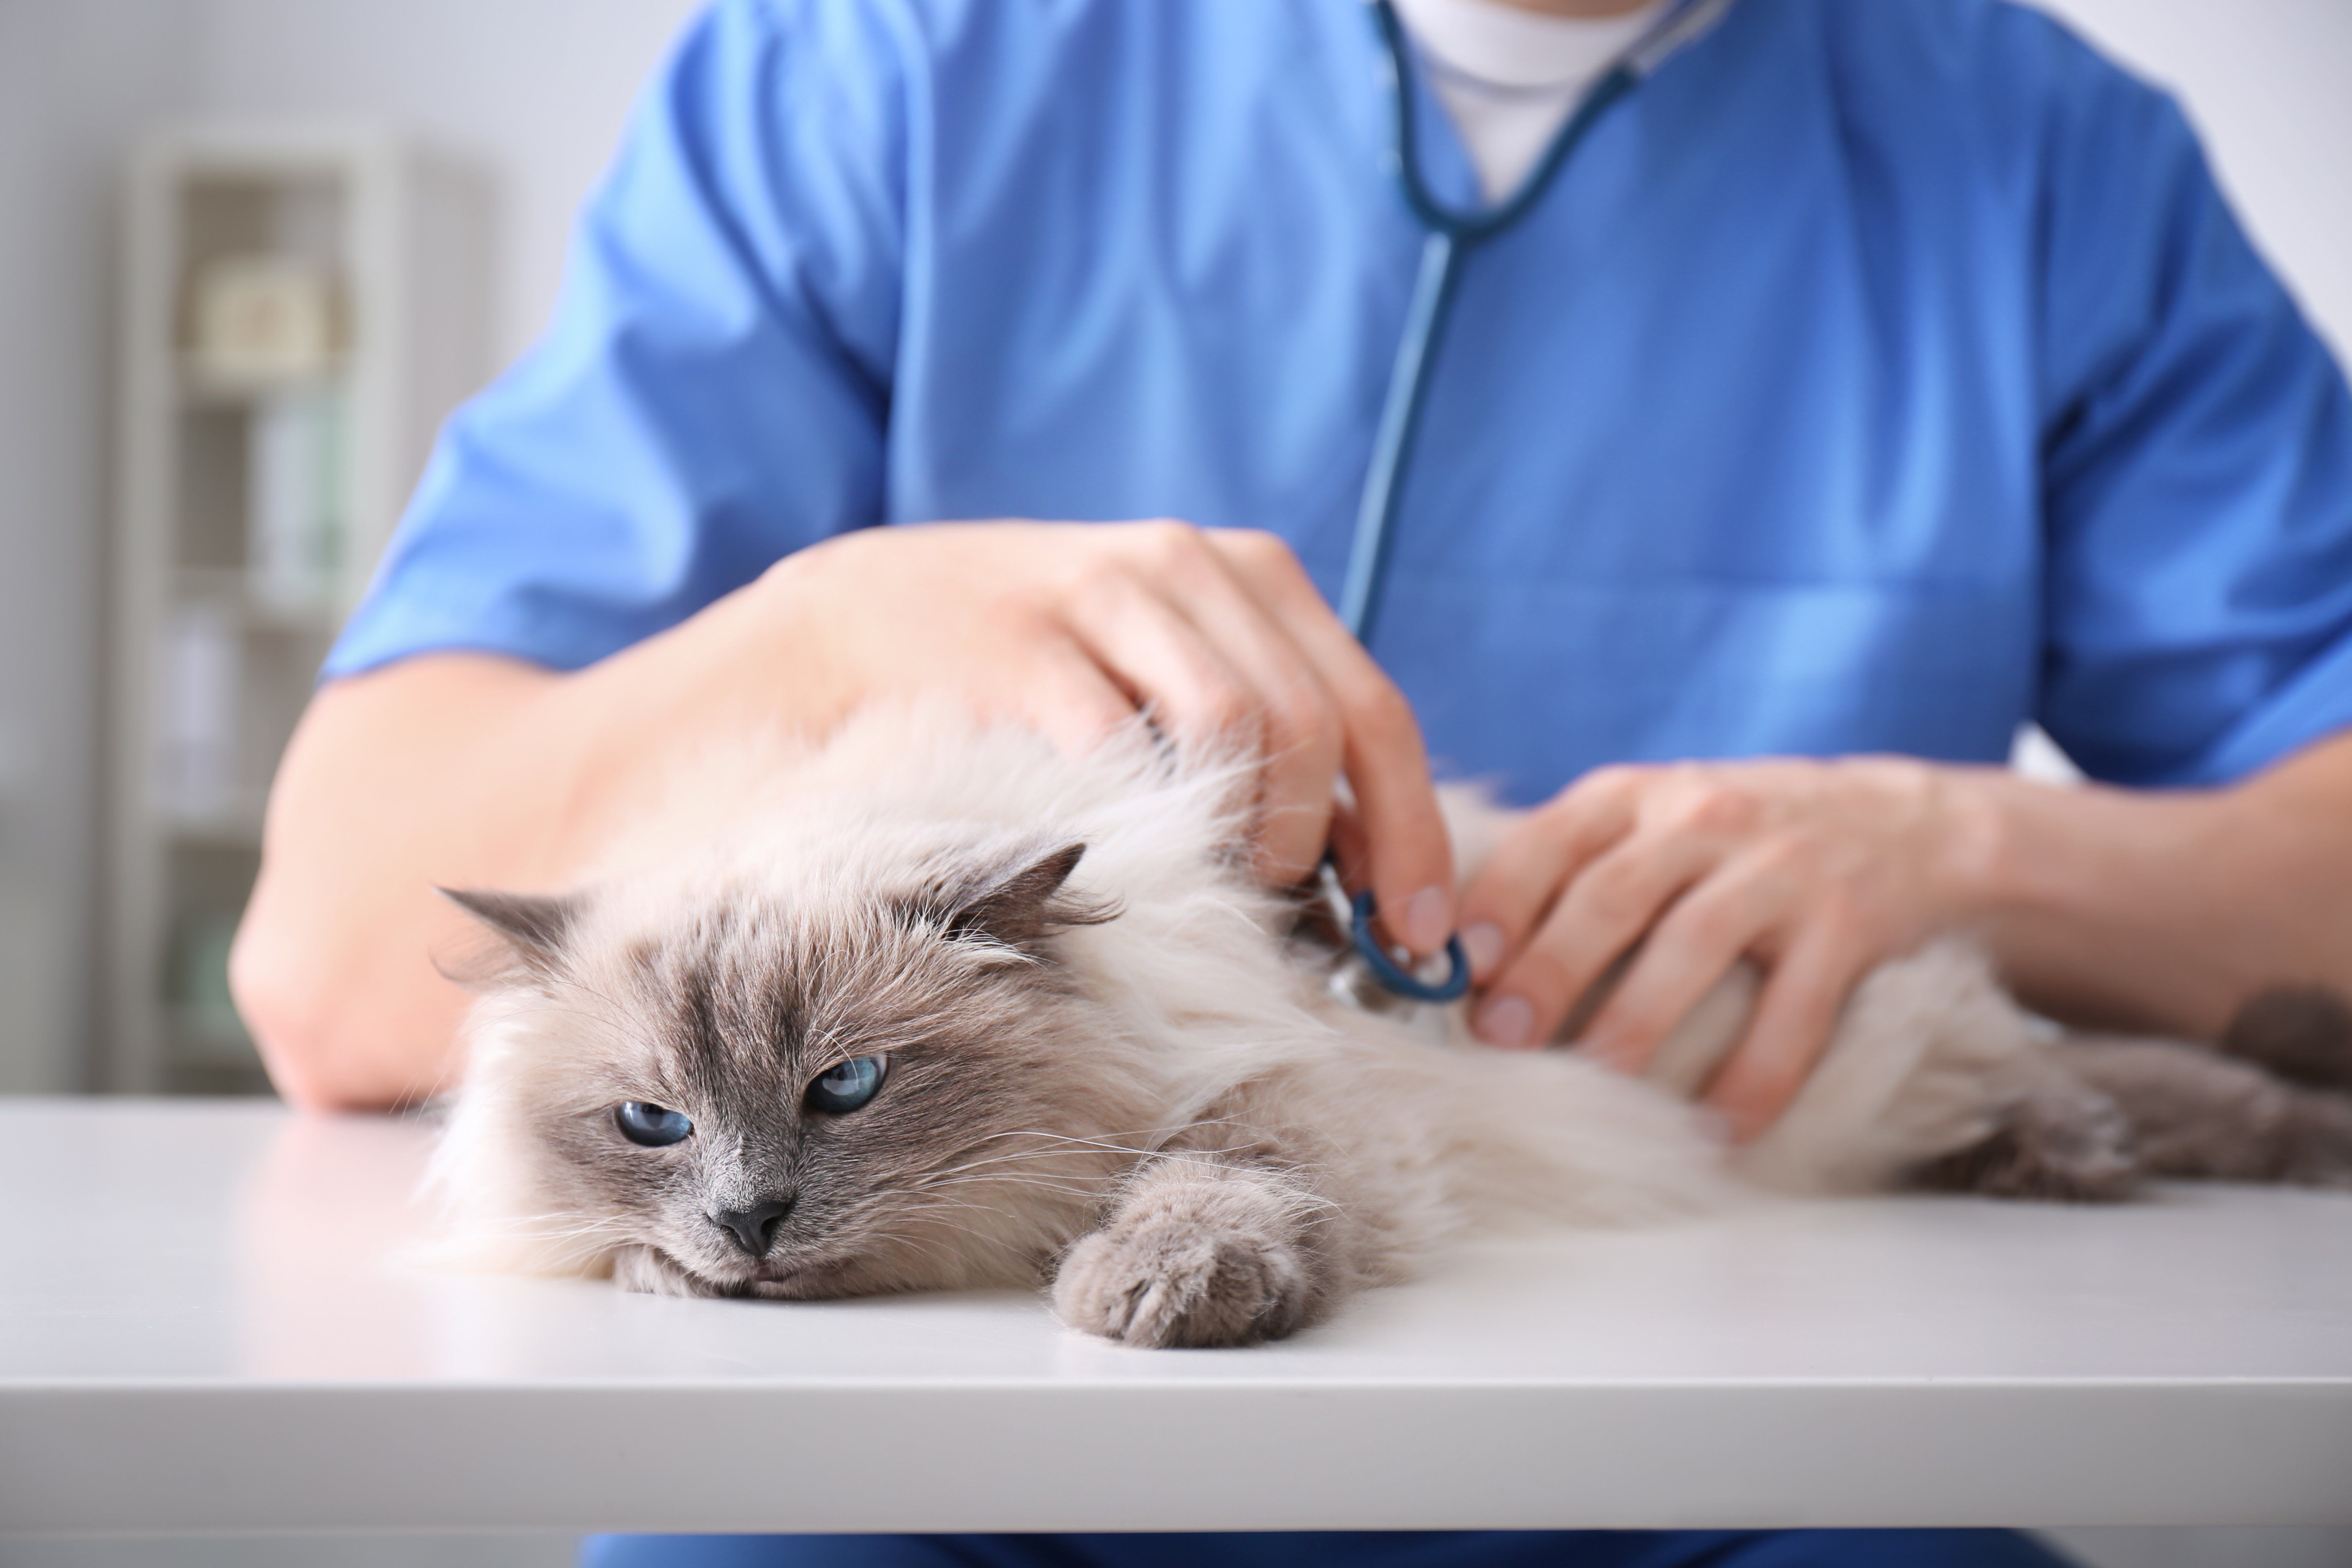 5 Things to Expect From an Emergency Vet Visit